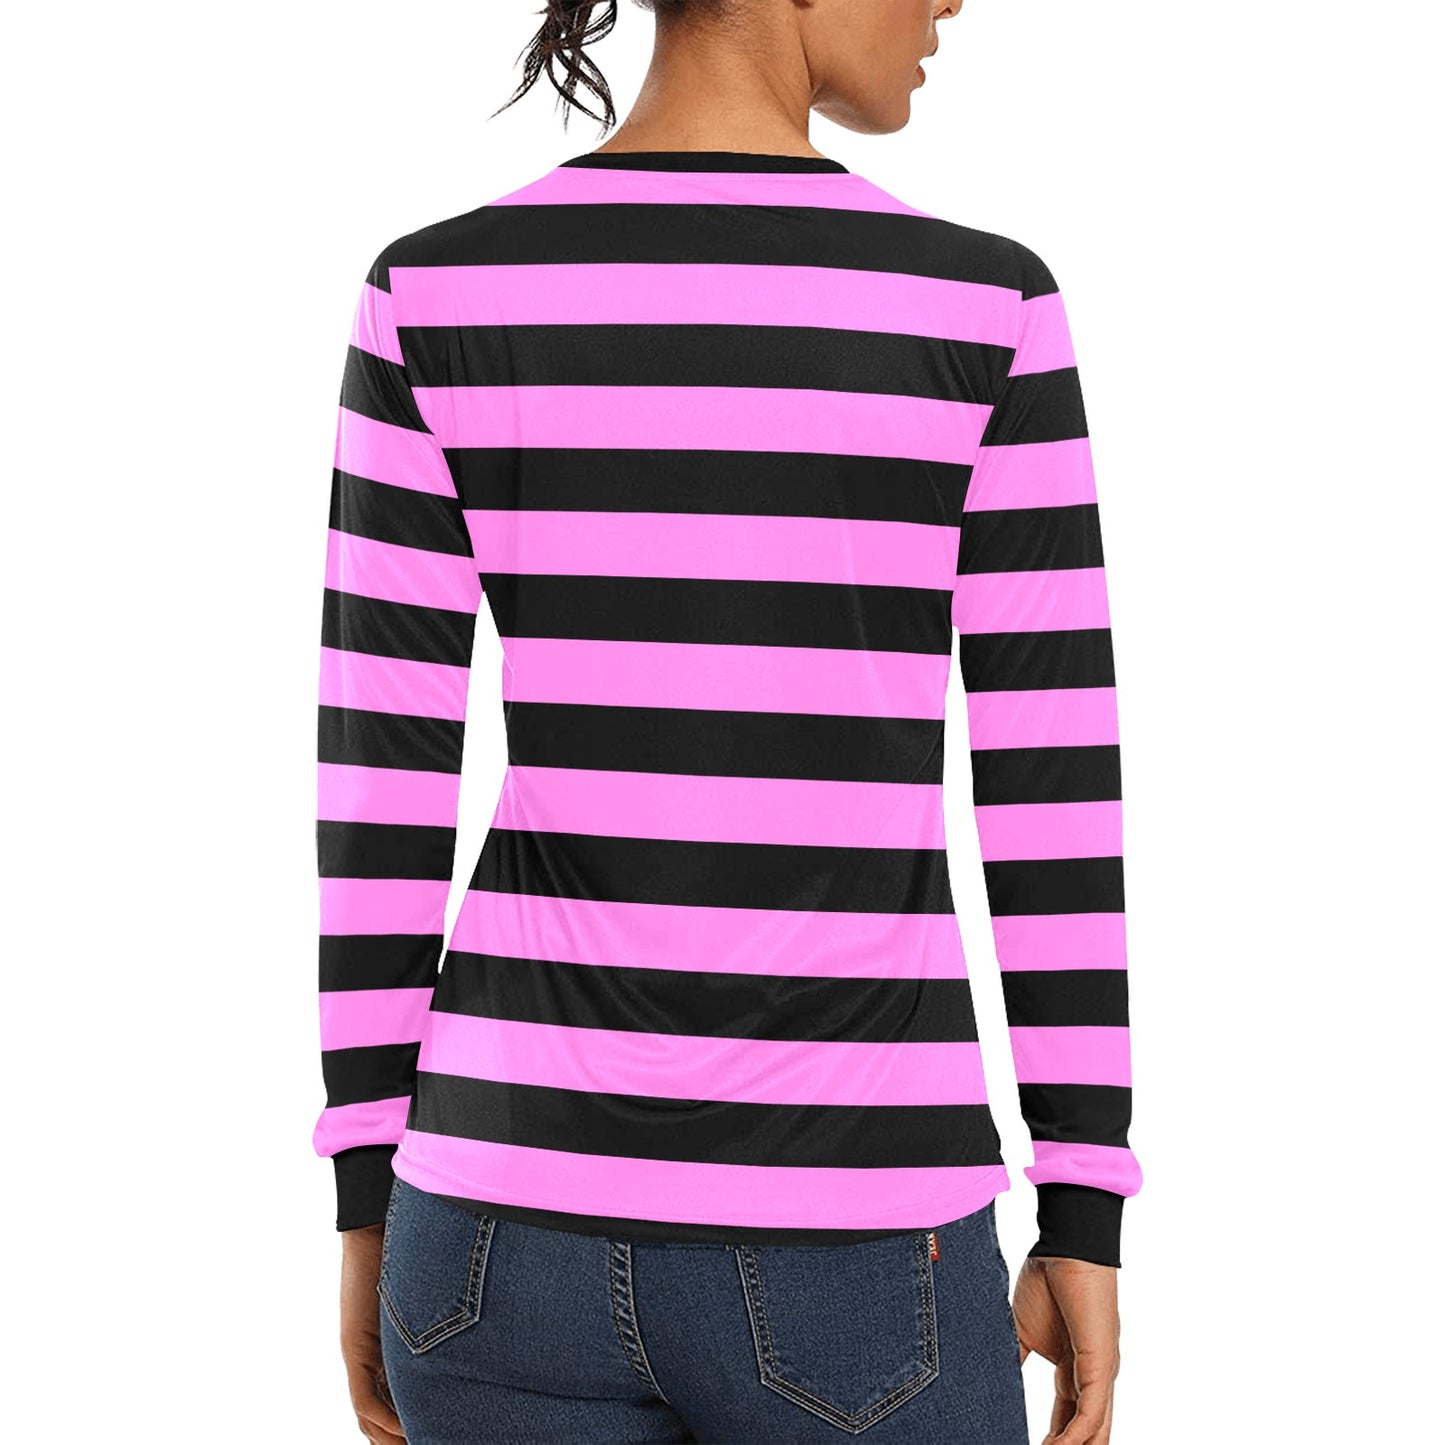 Black and Pink Striped Women Long Sleeve Tshirt, Designer Graphic Aesthetic Crew Neck Ladies Stripes Tee Shirt Top